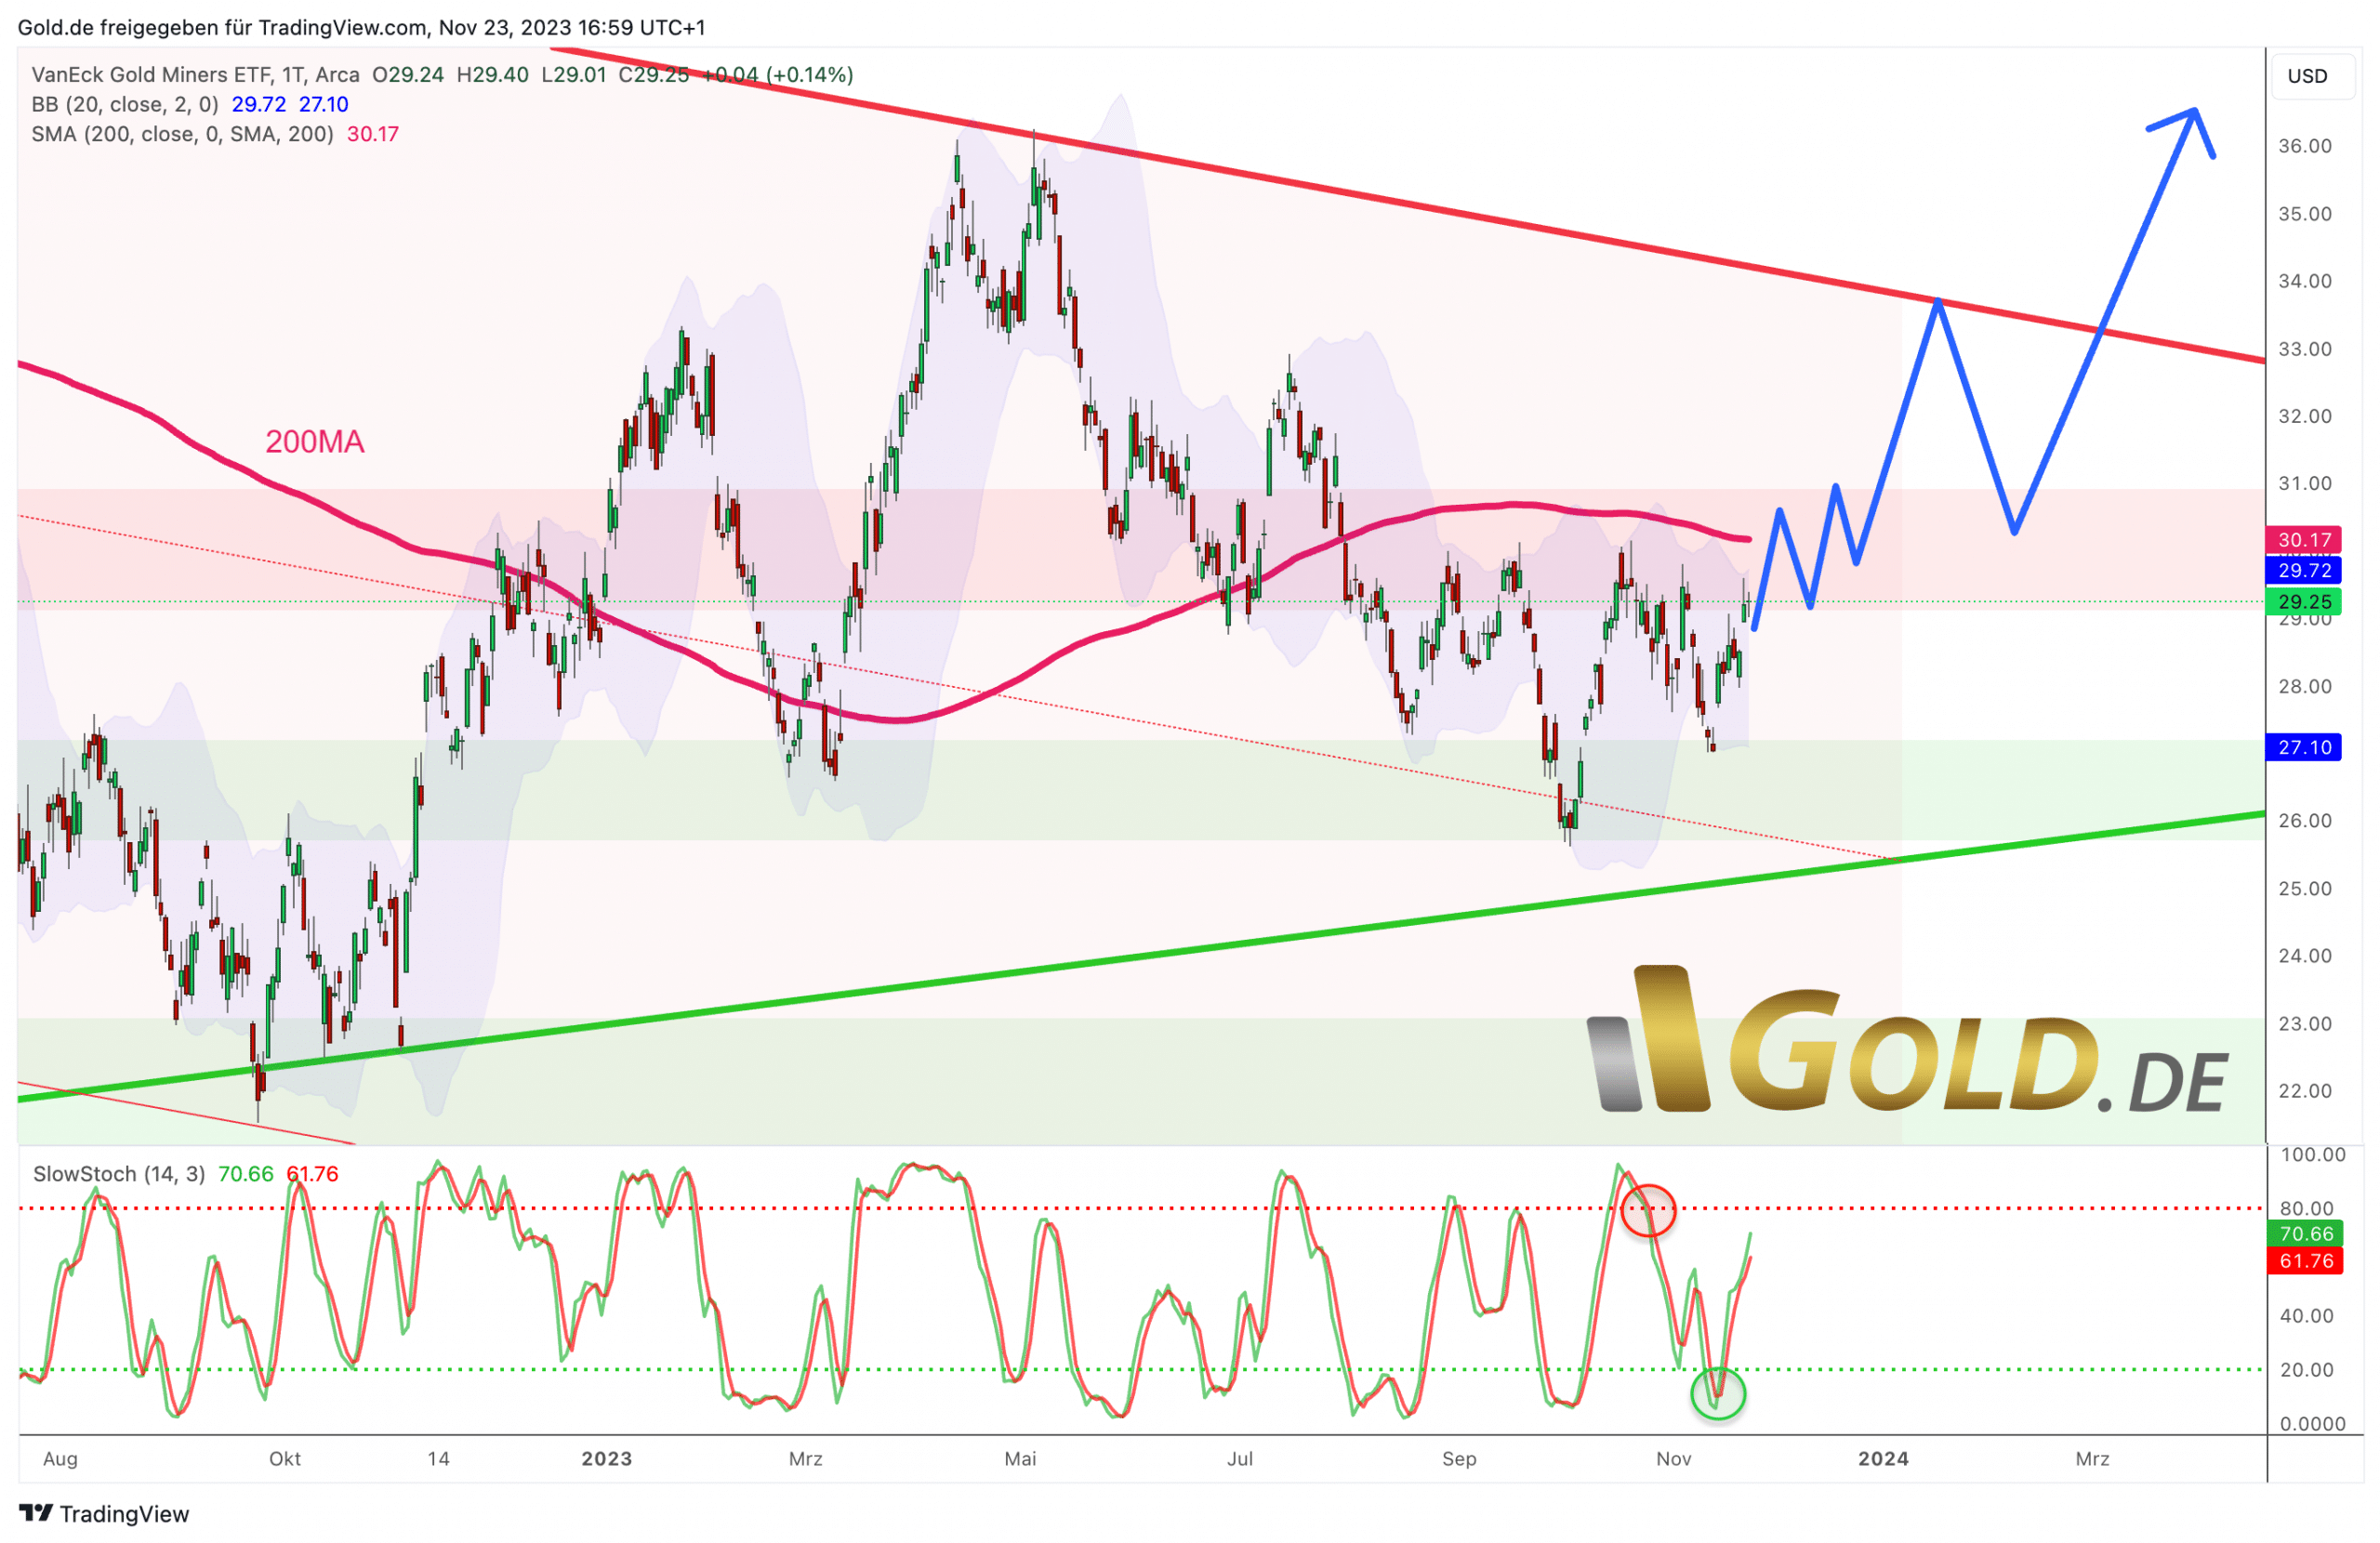 GDX in US-Dollar, daily chart as of November 24th, 2023. Source: Midas Touch Consulting. November 26th, 2023, Mining Stocks – Unpopular Yet Promising